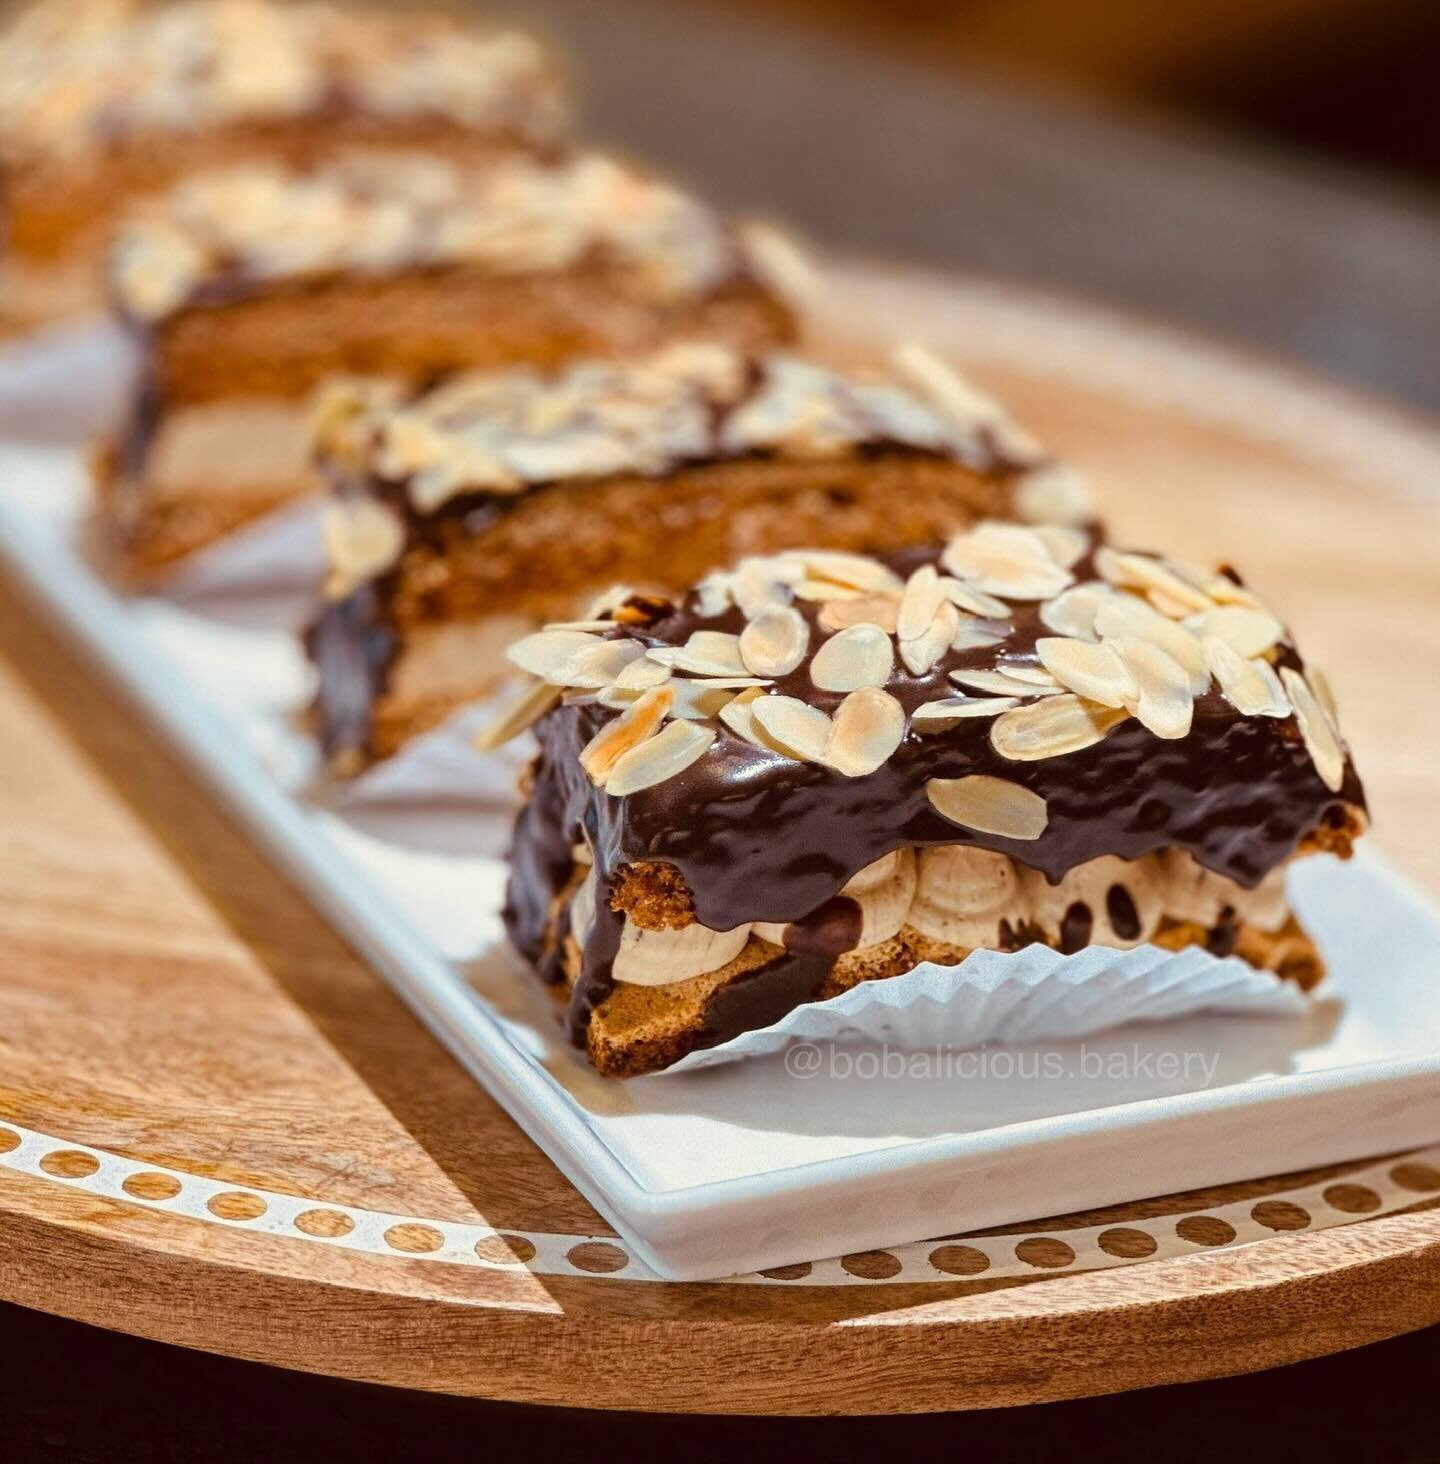 Introducing the coffee dacqouise! Try this decadent dessert filled with coffee buttercream, topped with ganache, and sprinkled with sliced almonds. 

📍 2926 S Campbell Ave Springfield, MO 65807
⏰ Mon-Sat: 11a-8p, Sunday: 11a-6p